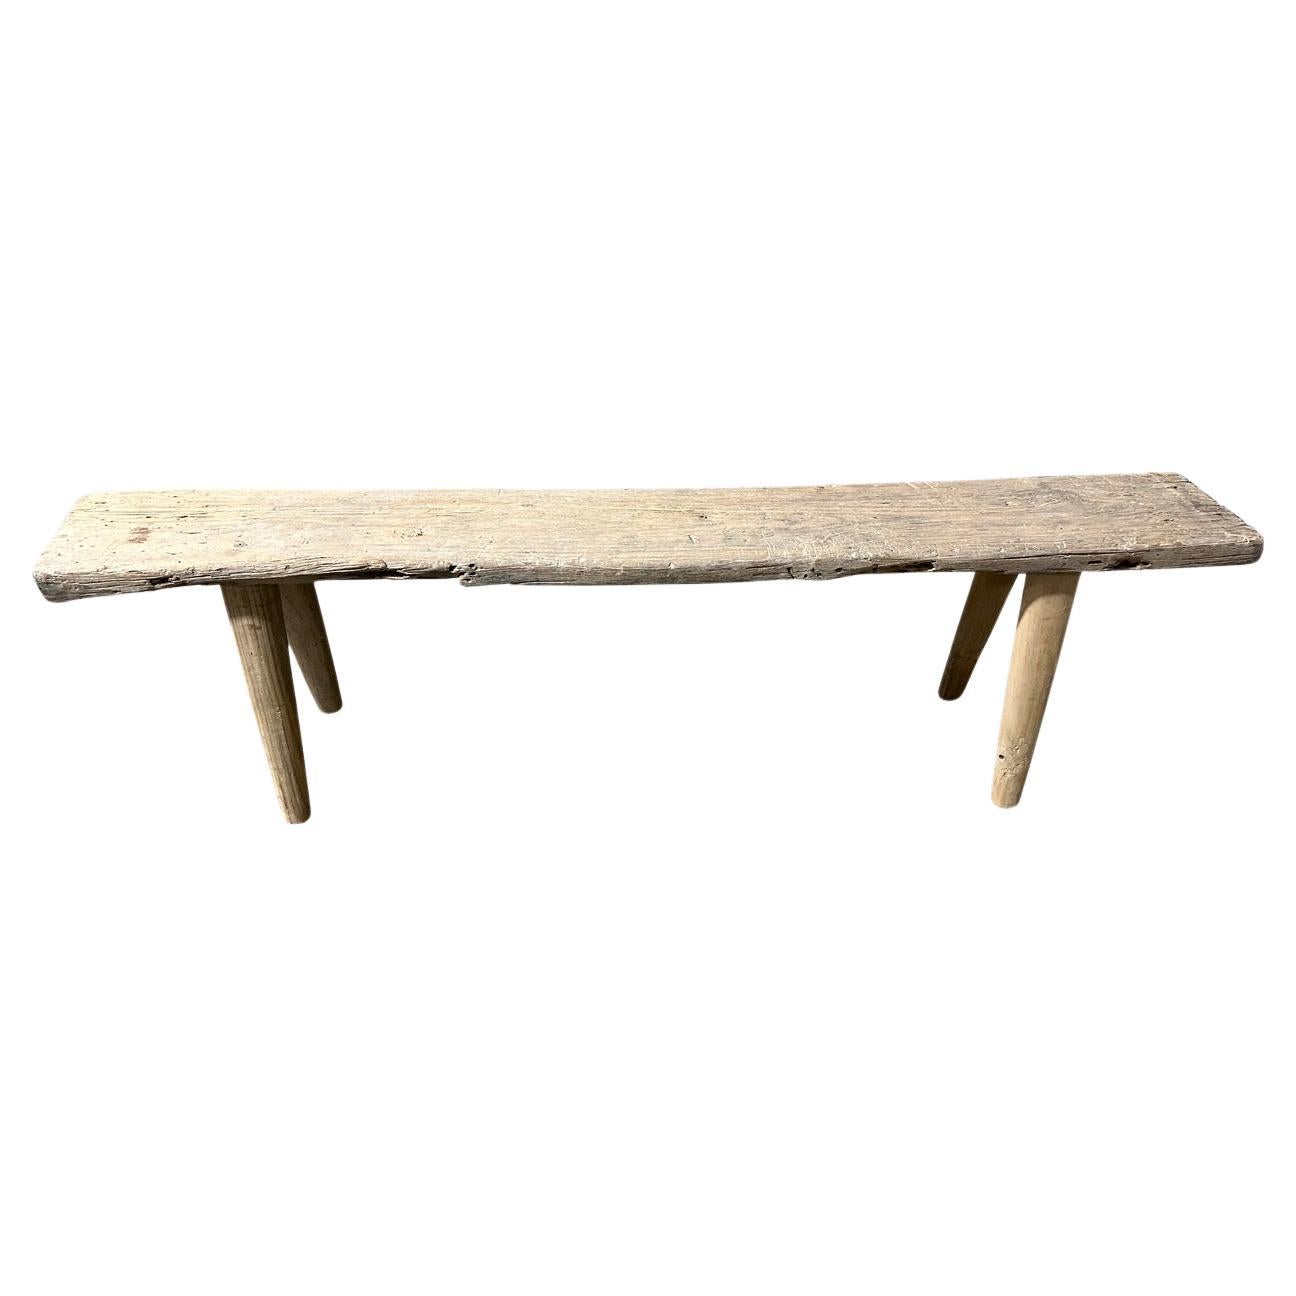 Andrianna Shamaris Antique Bleached Teak Wood Bench For Sale